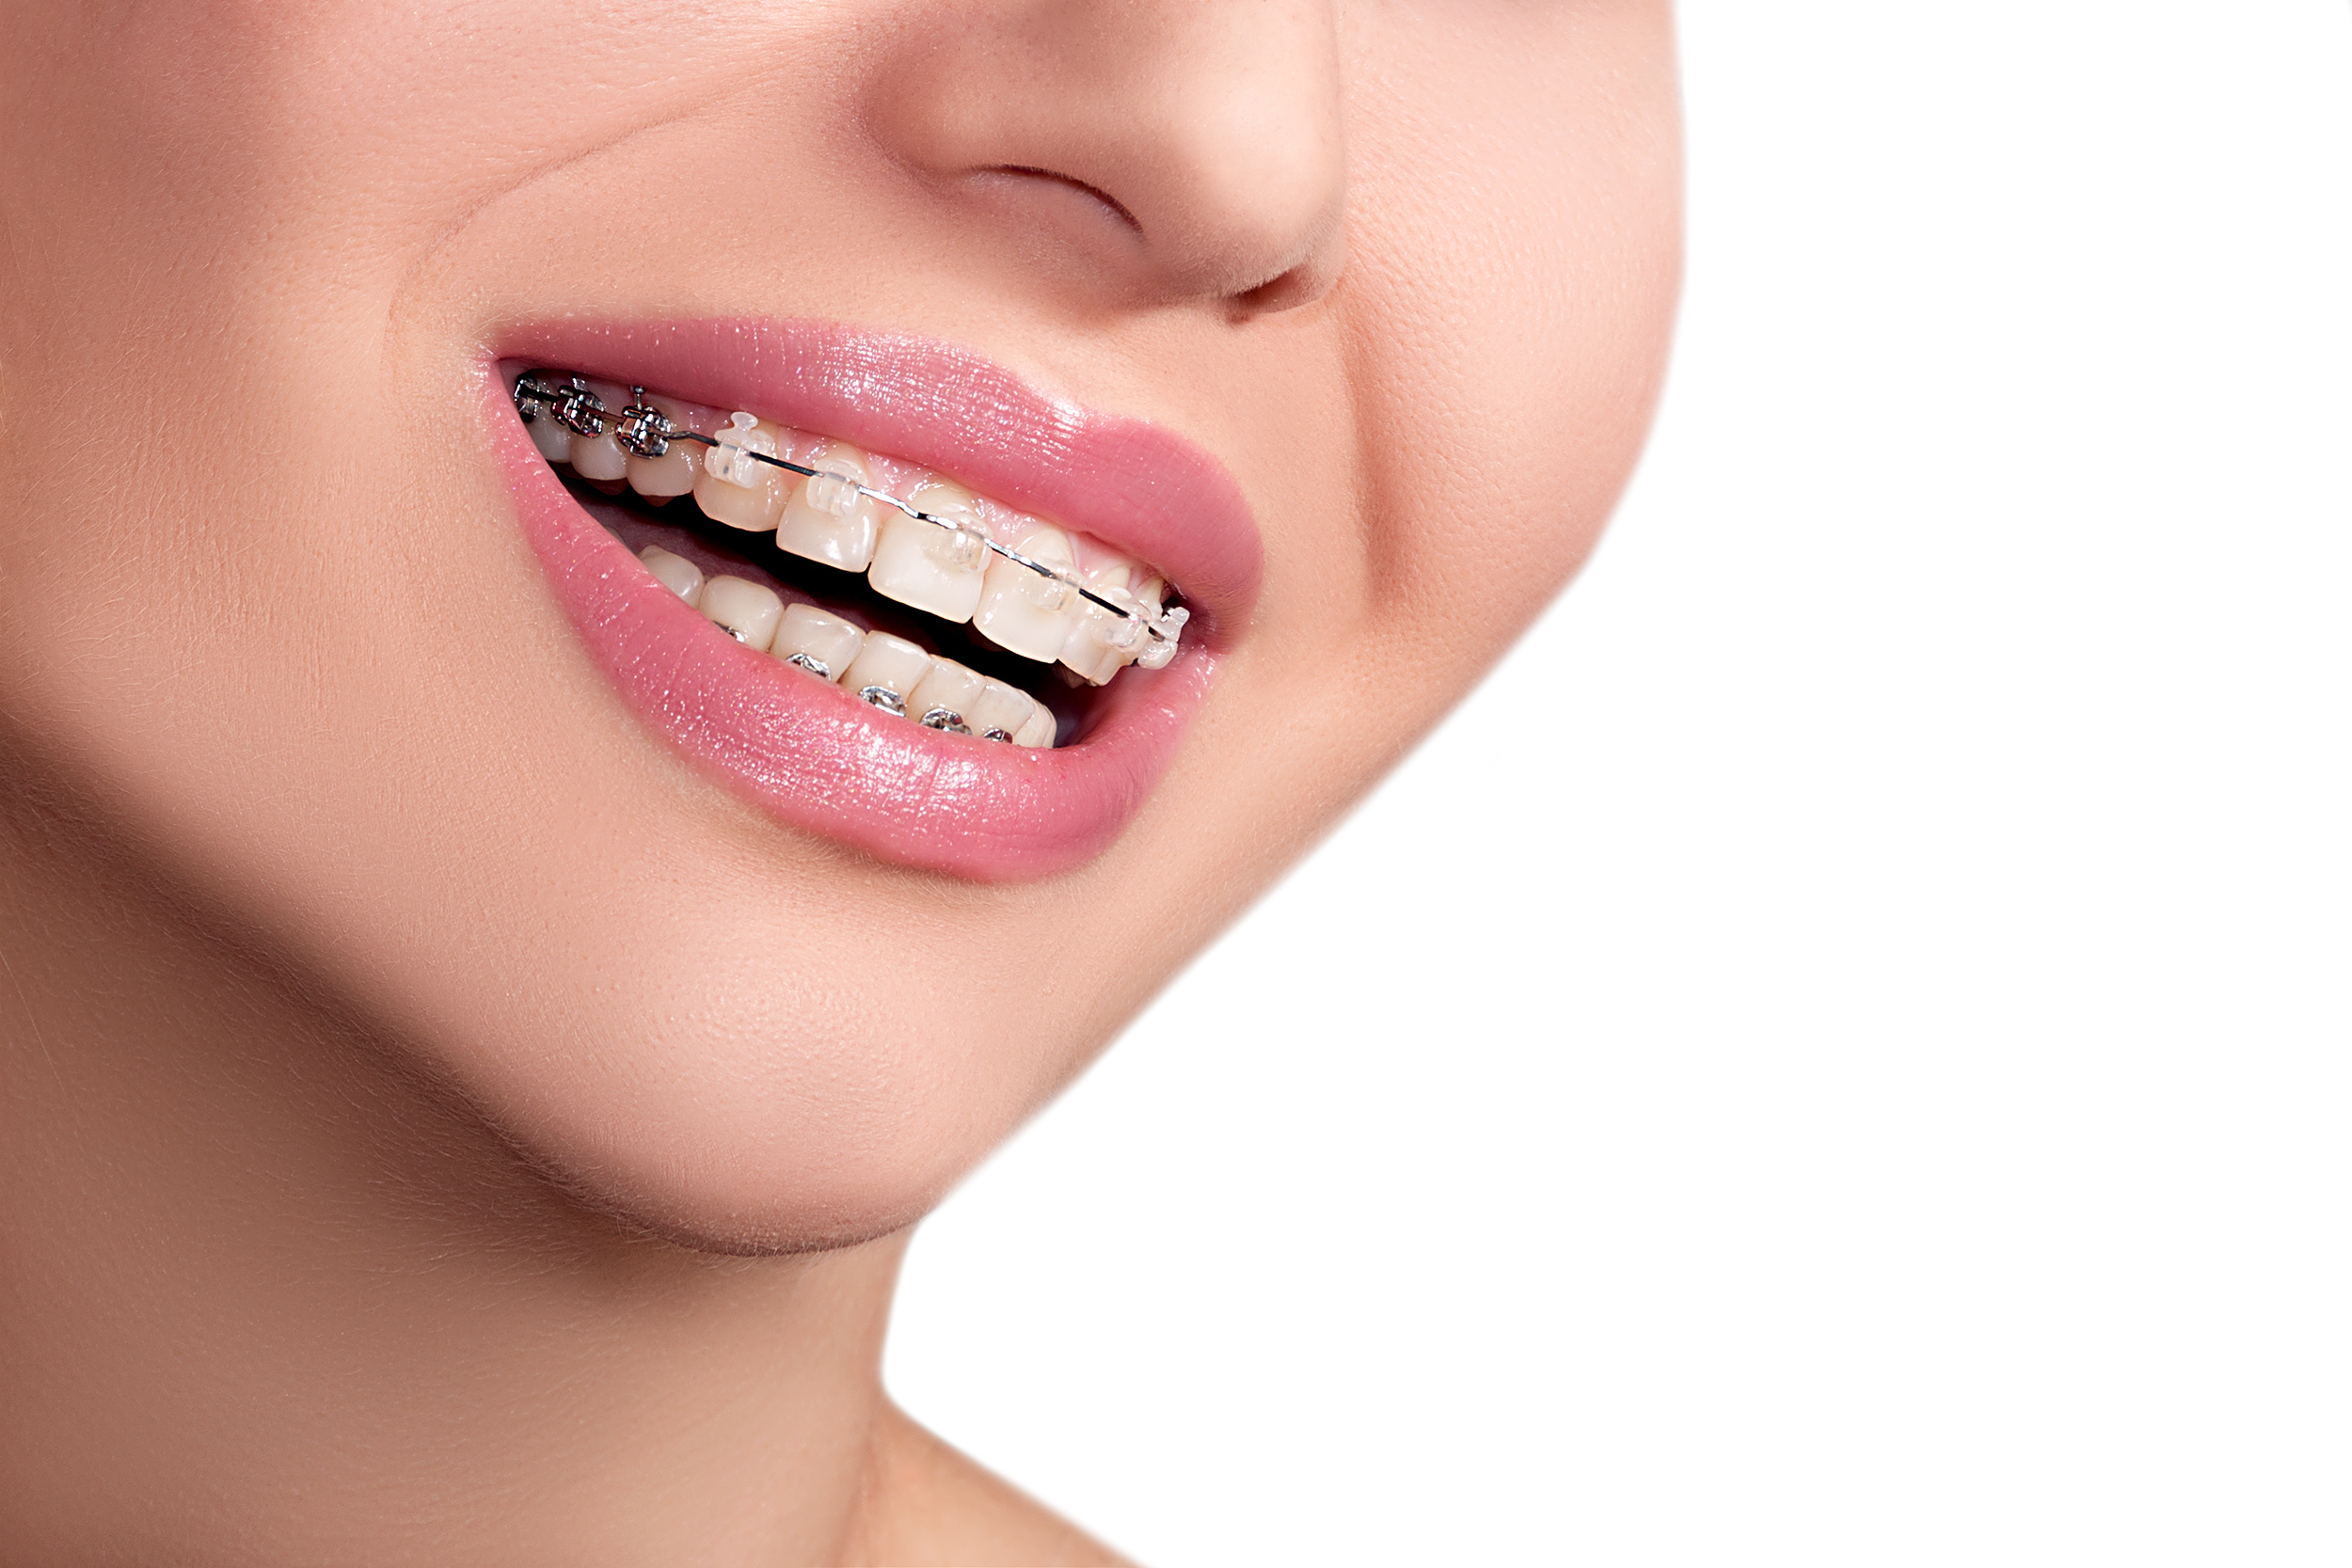 Mukwonago Braces Options: Finding The Best Fit For You